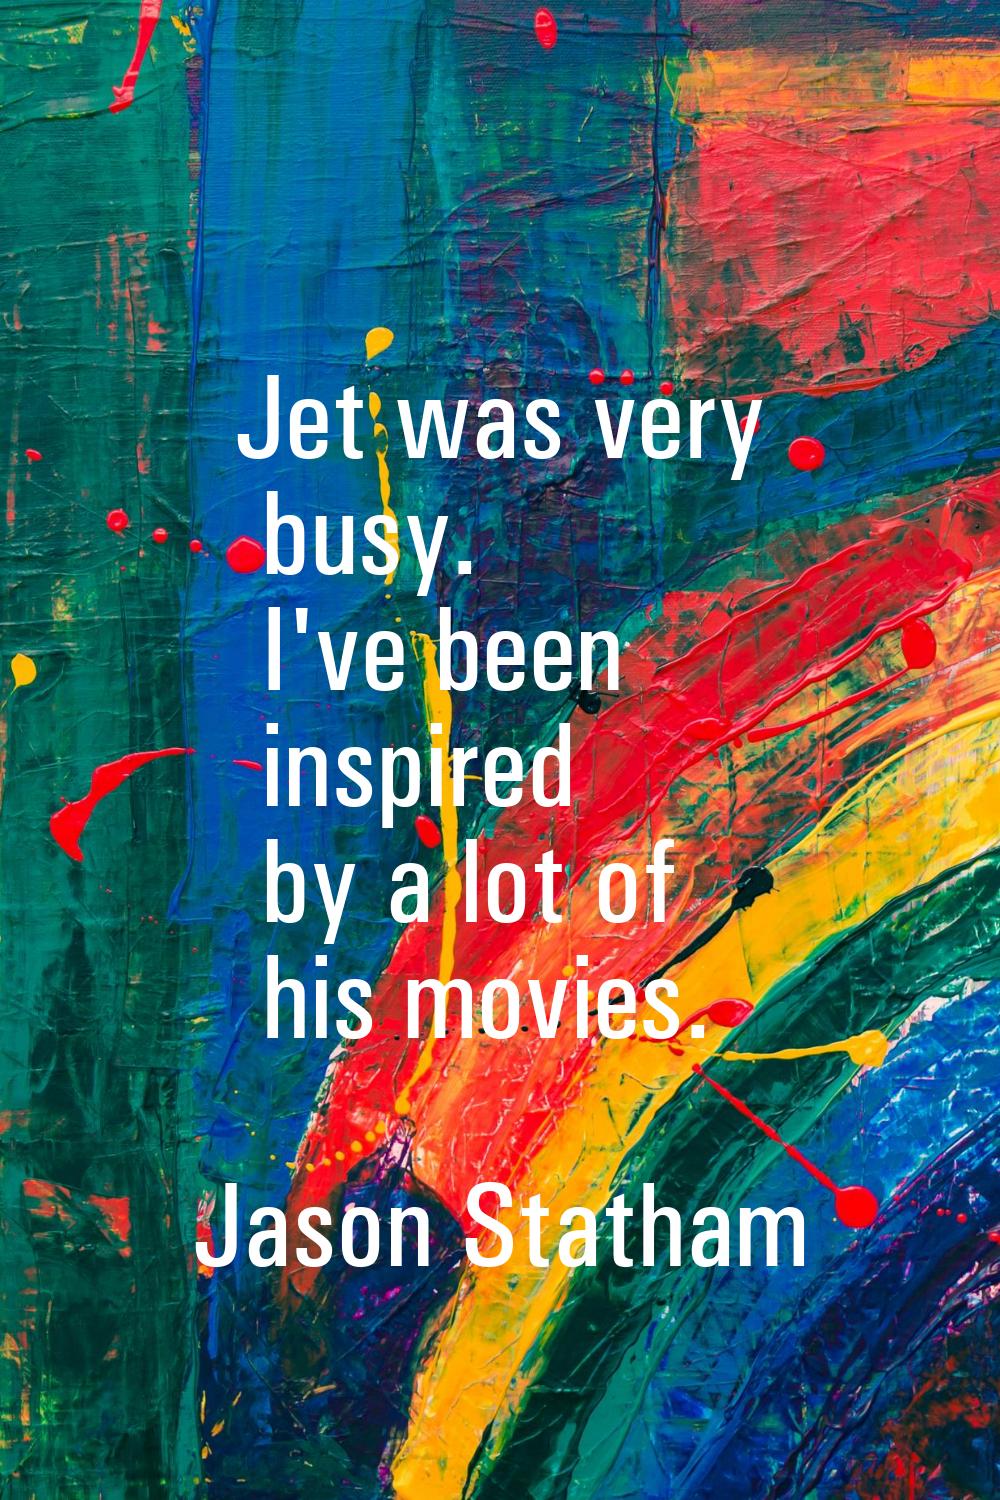 Jet was very busy. I've been inspired by a lot of his movies.